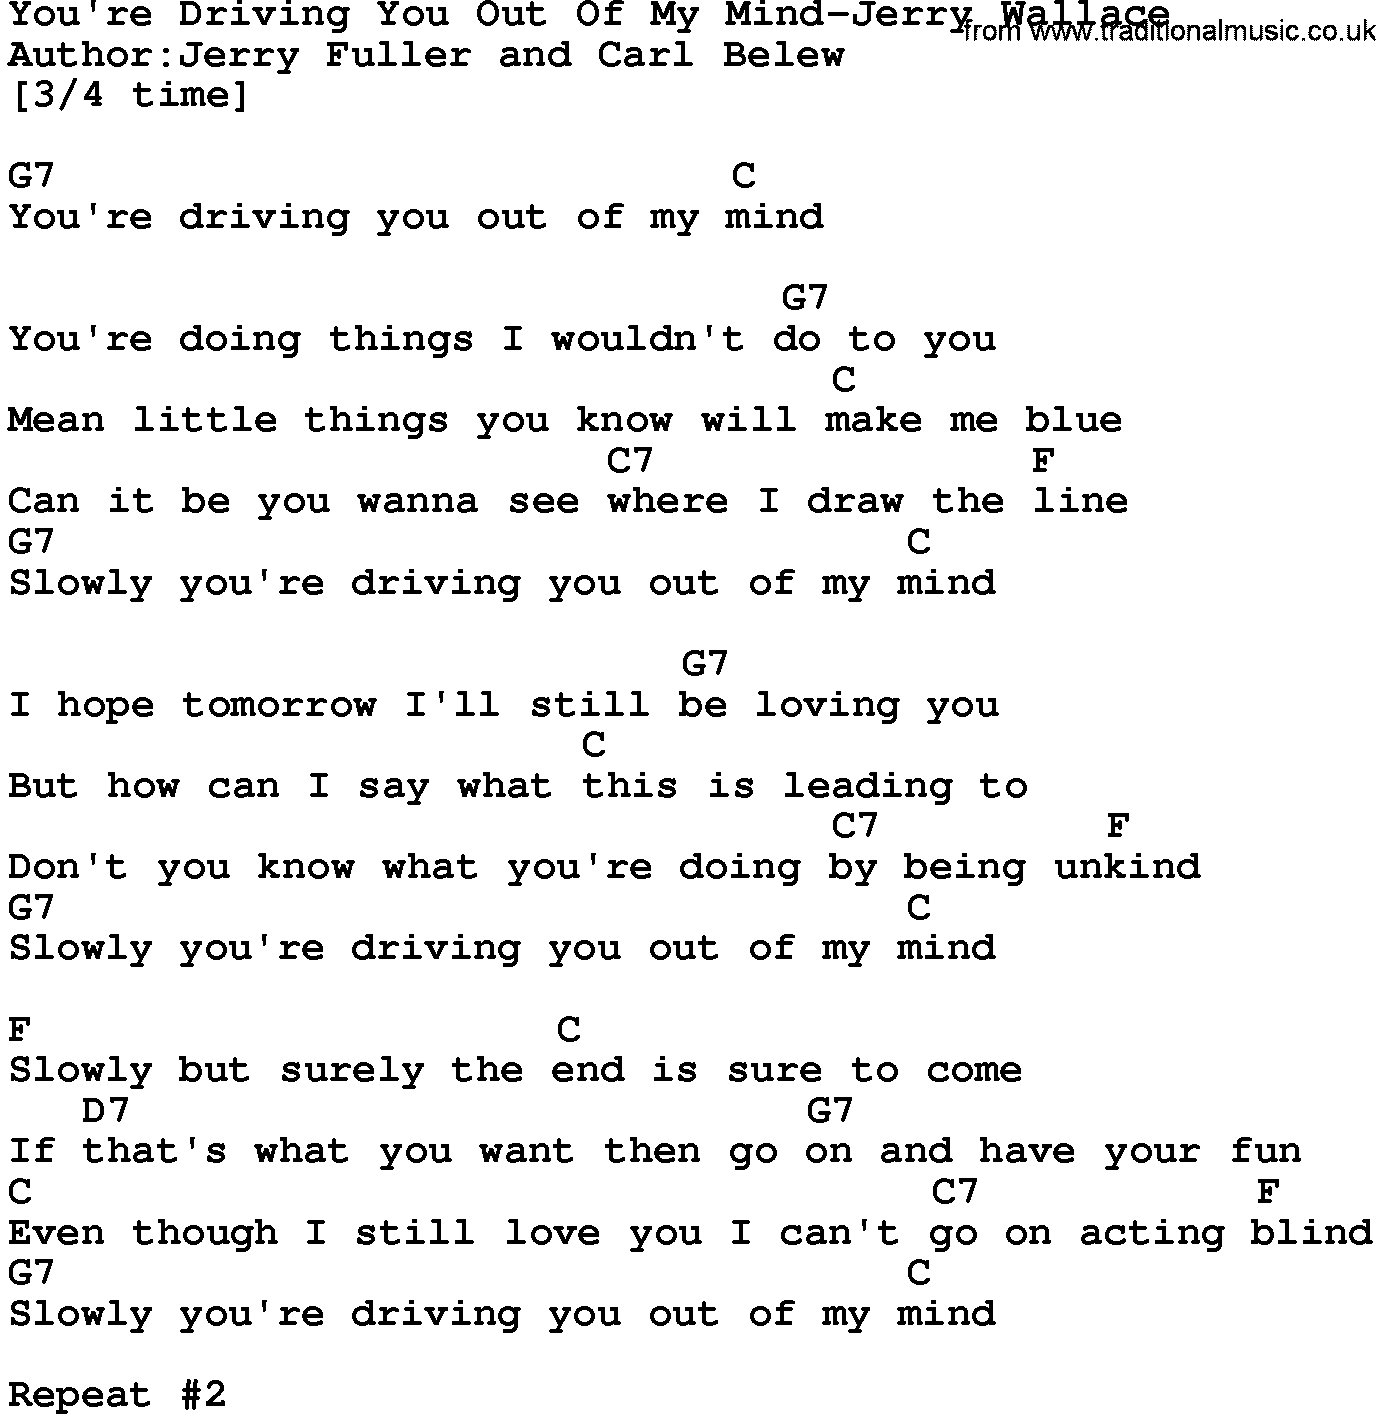 Country music song: You're Driving You Out Of My Mind-Jerry Wallace lyrics and chords